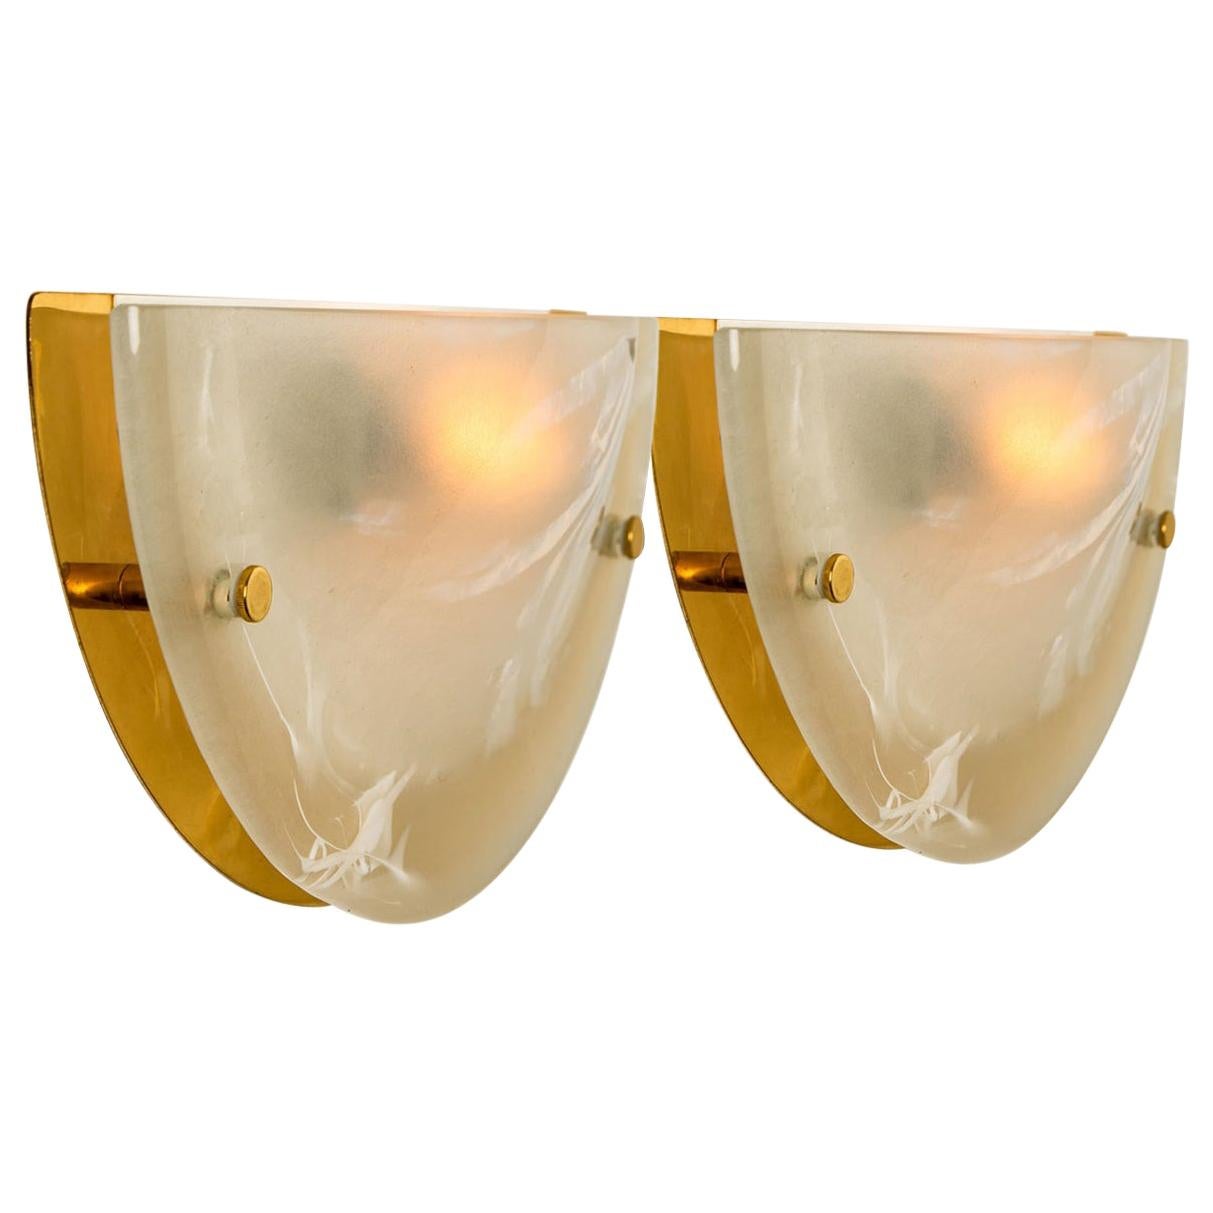 Pair of Murano Brass and Glass Wall Lights, Hillebrand, 1975